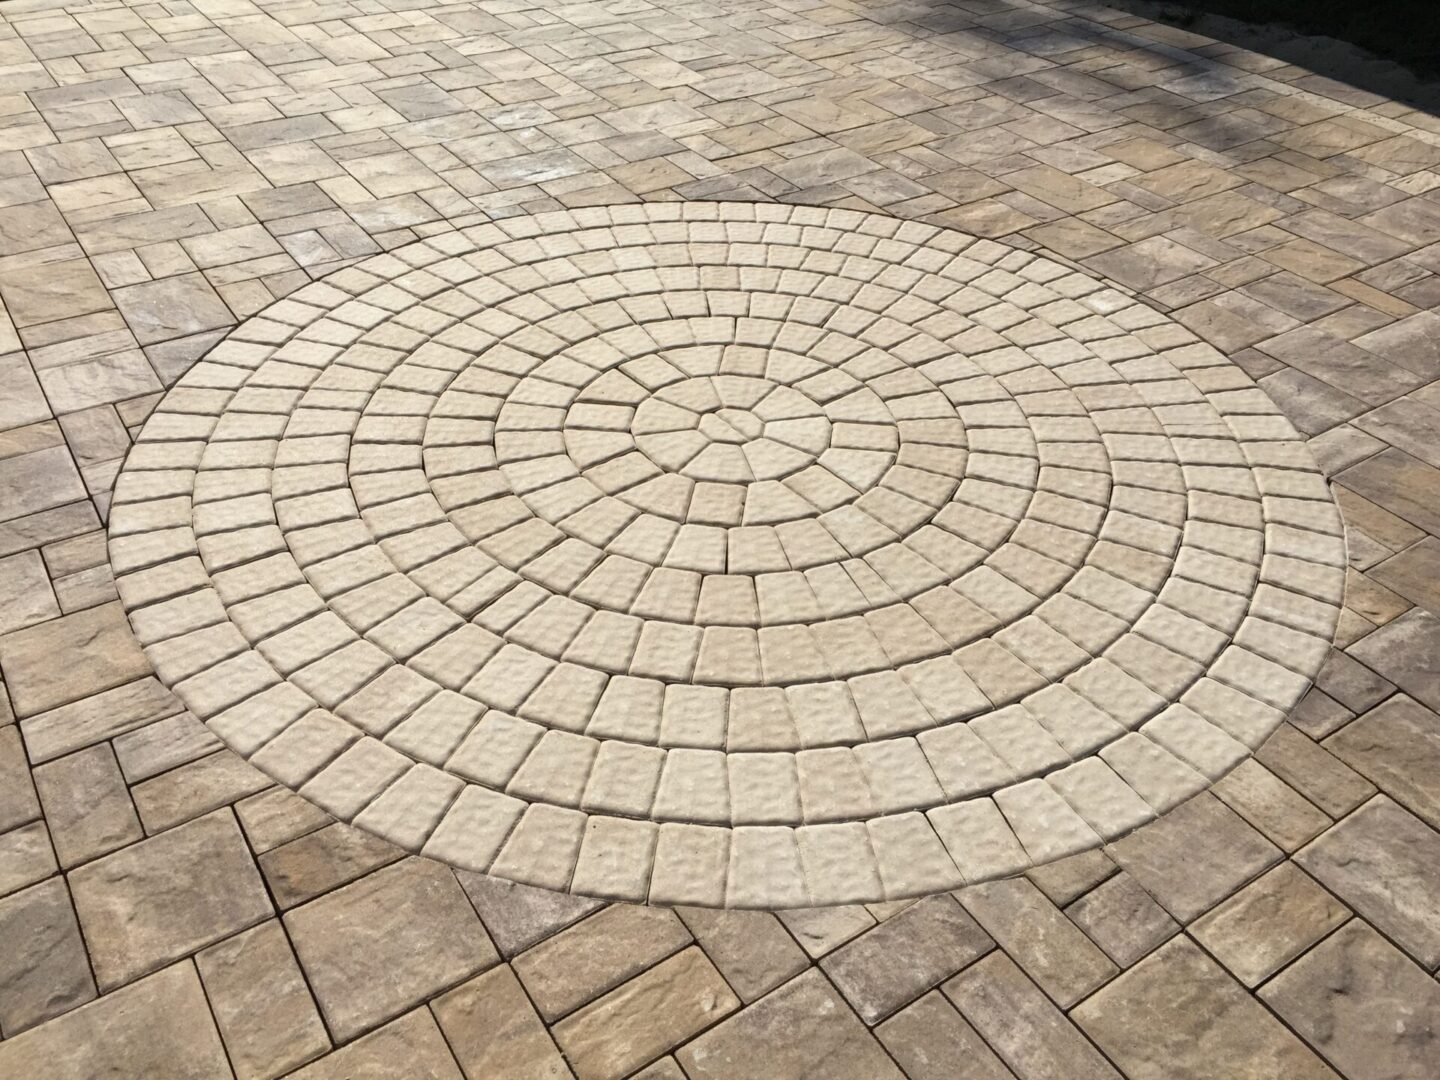 A circular design made of bricks on the floor outside of a place.